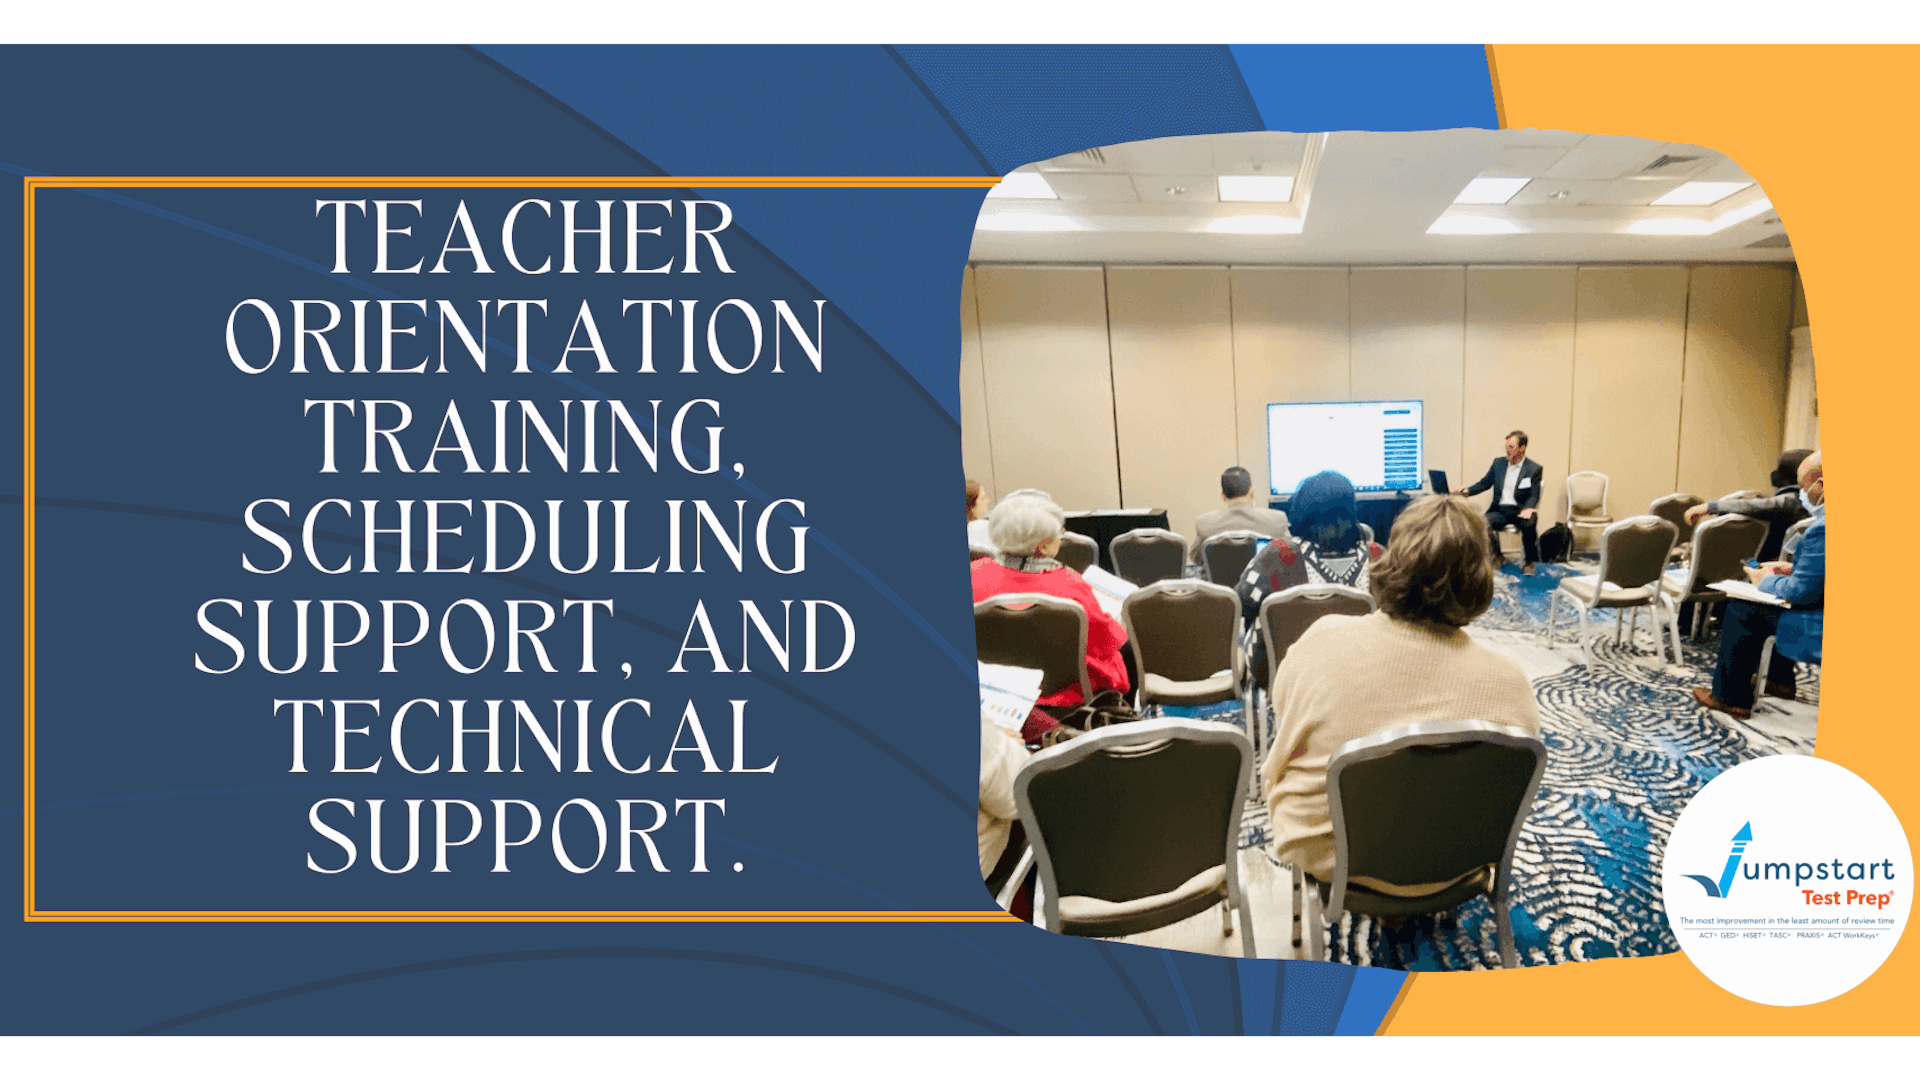 Teacher orientation training, scheduling support, and technical support